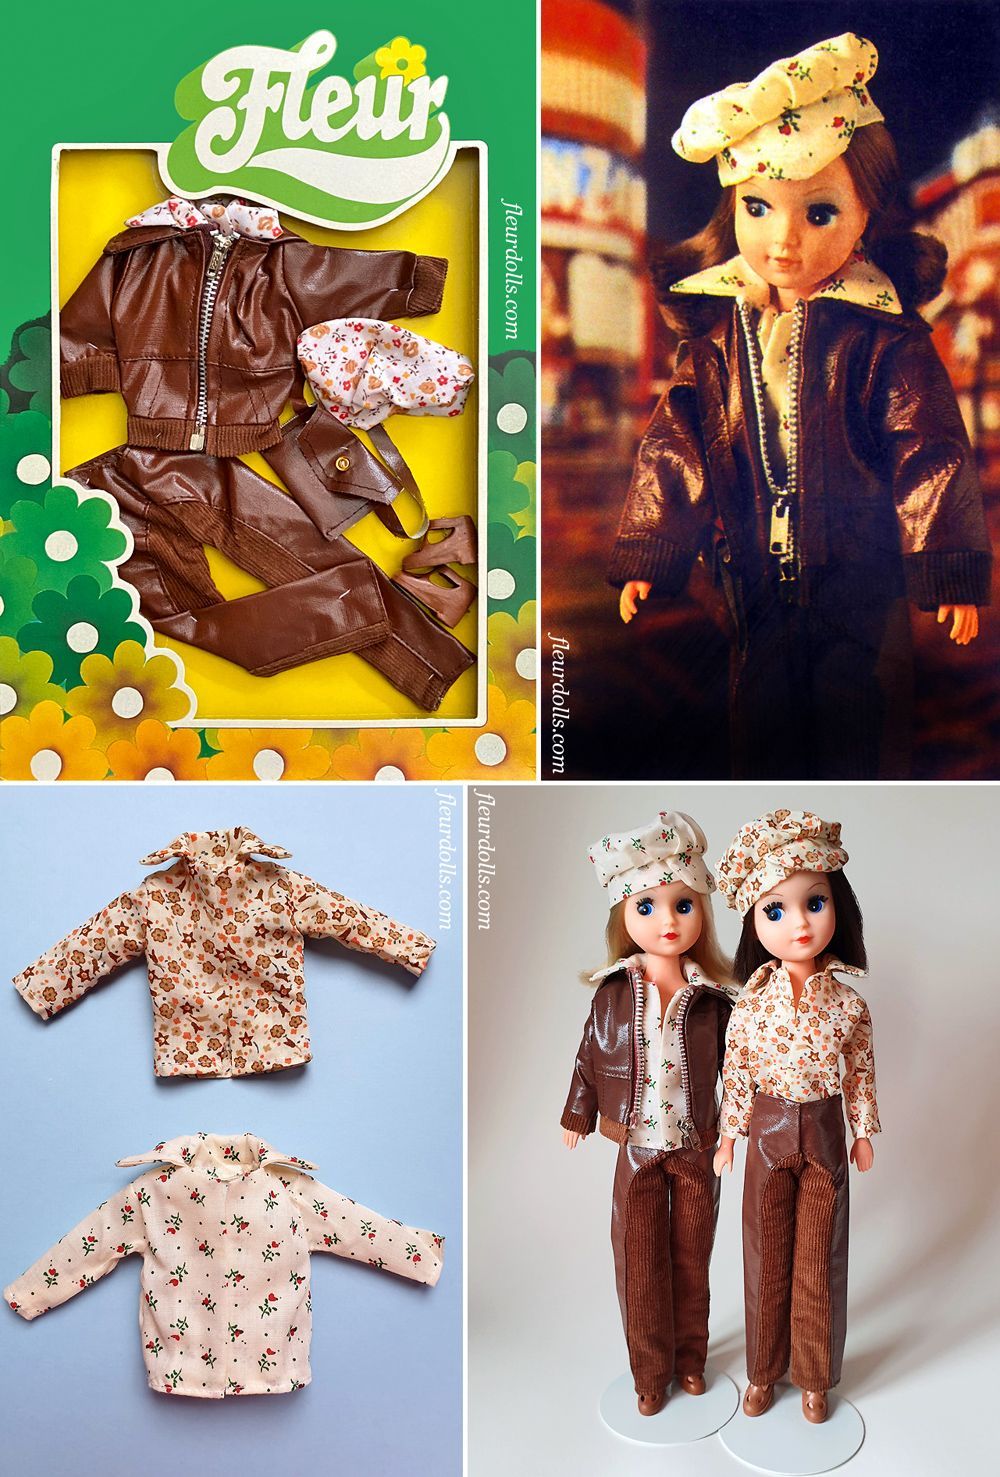 Fleur fashion 1256 corduroy and faux leather brown outfit with beret NRFB in box motorcycle style